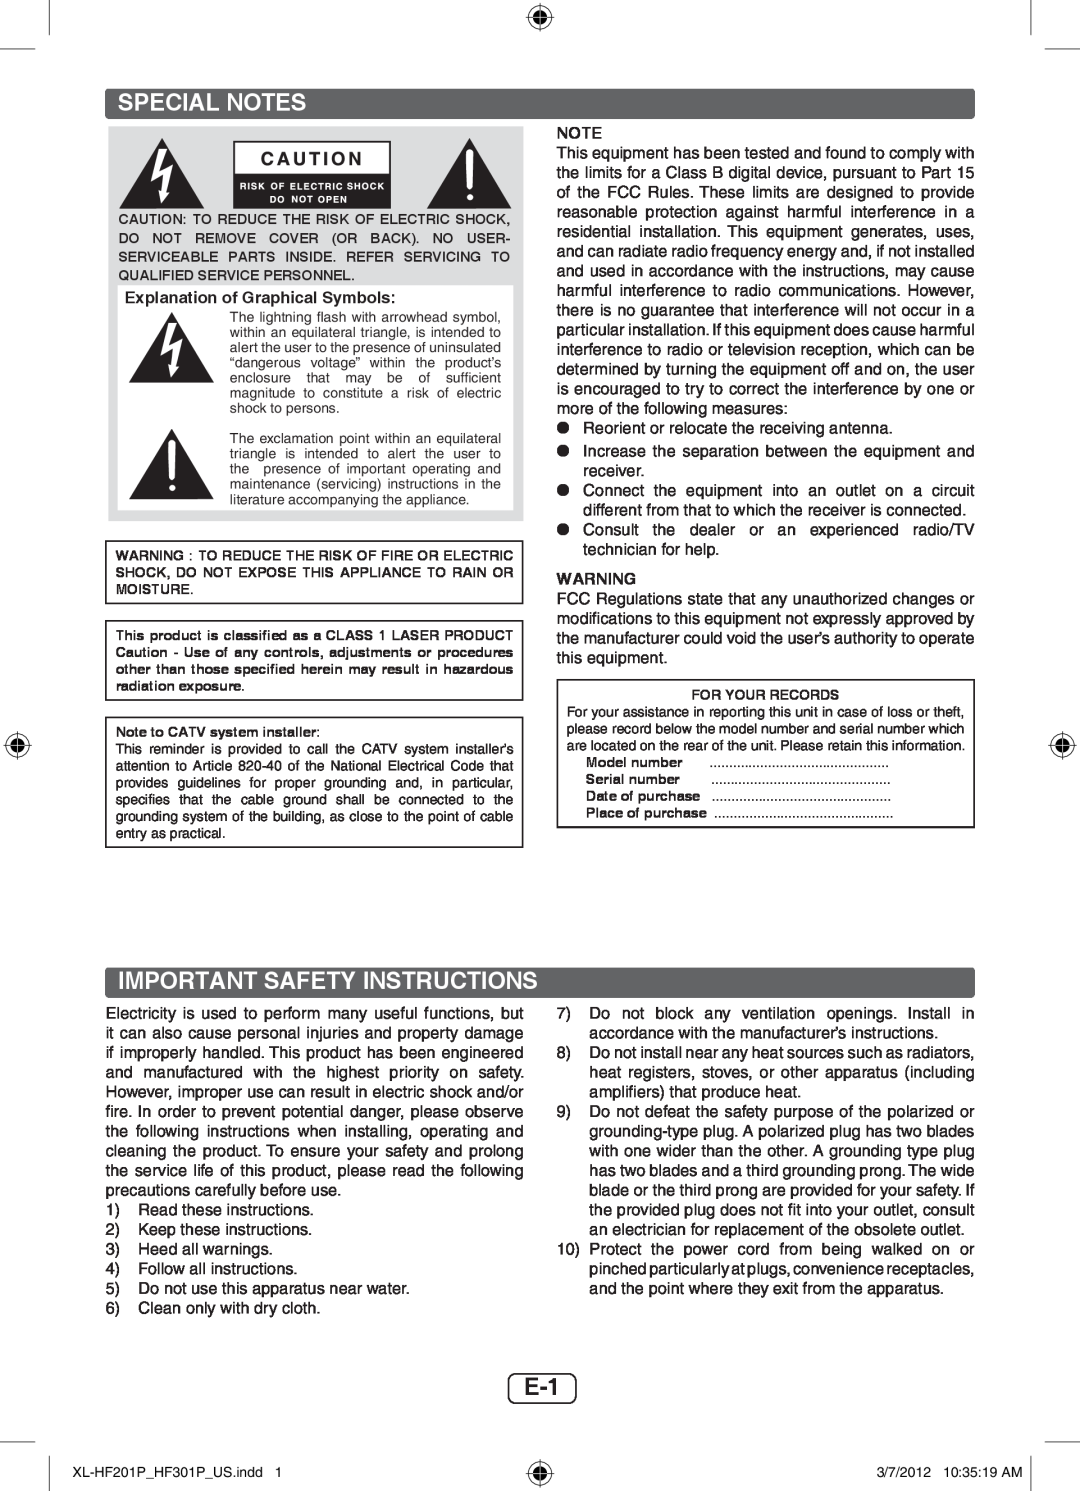 Sharp XLHF201P operation manual Special Notes, Important Safety Instructions 